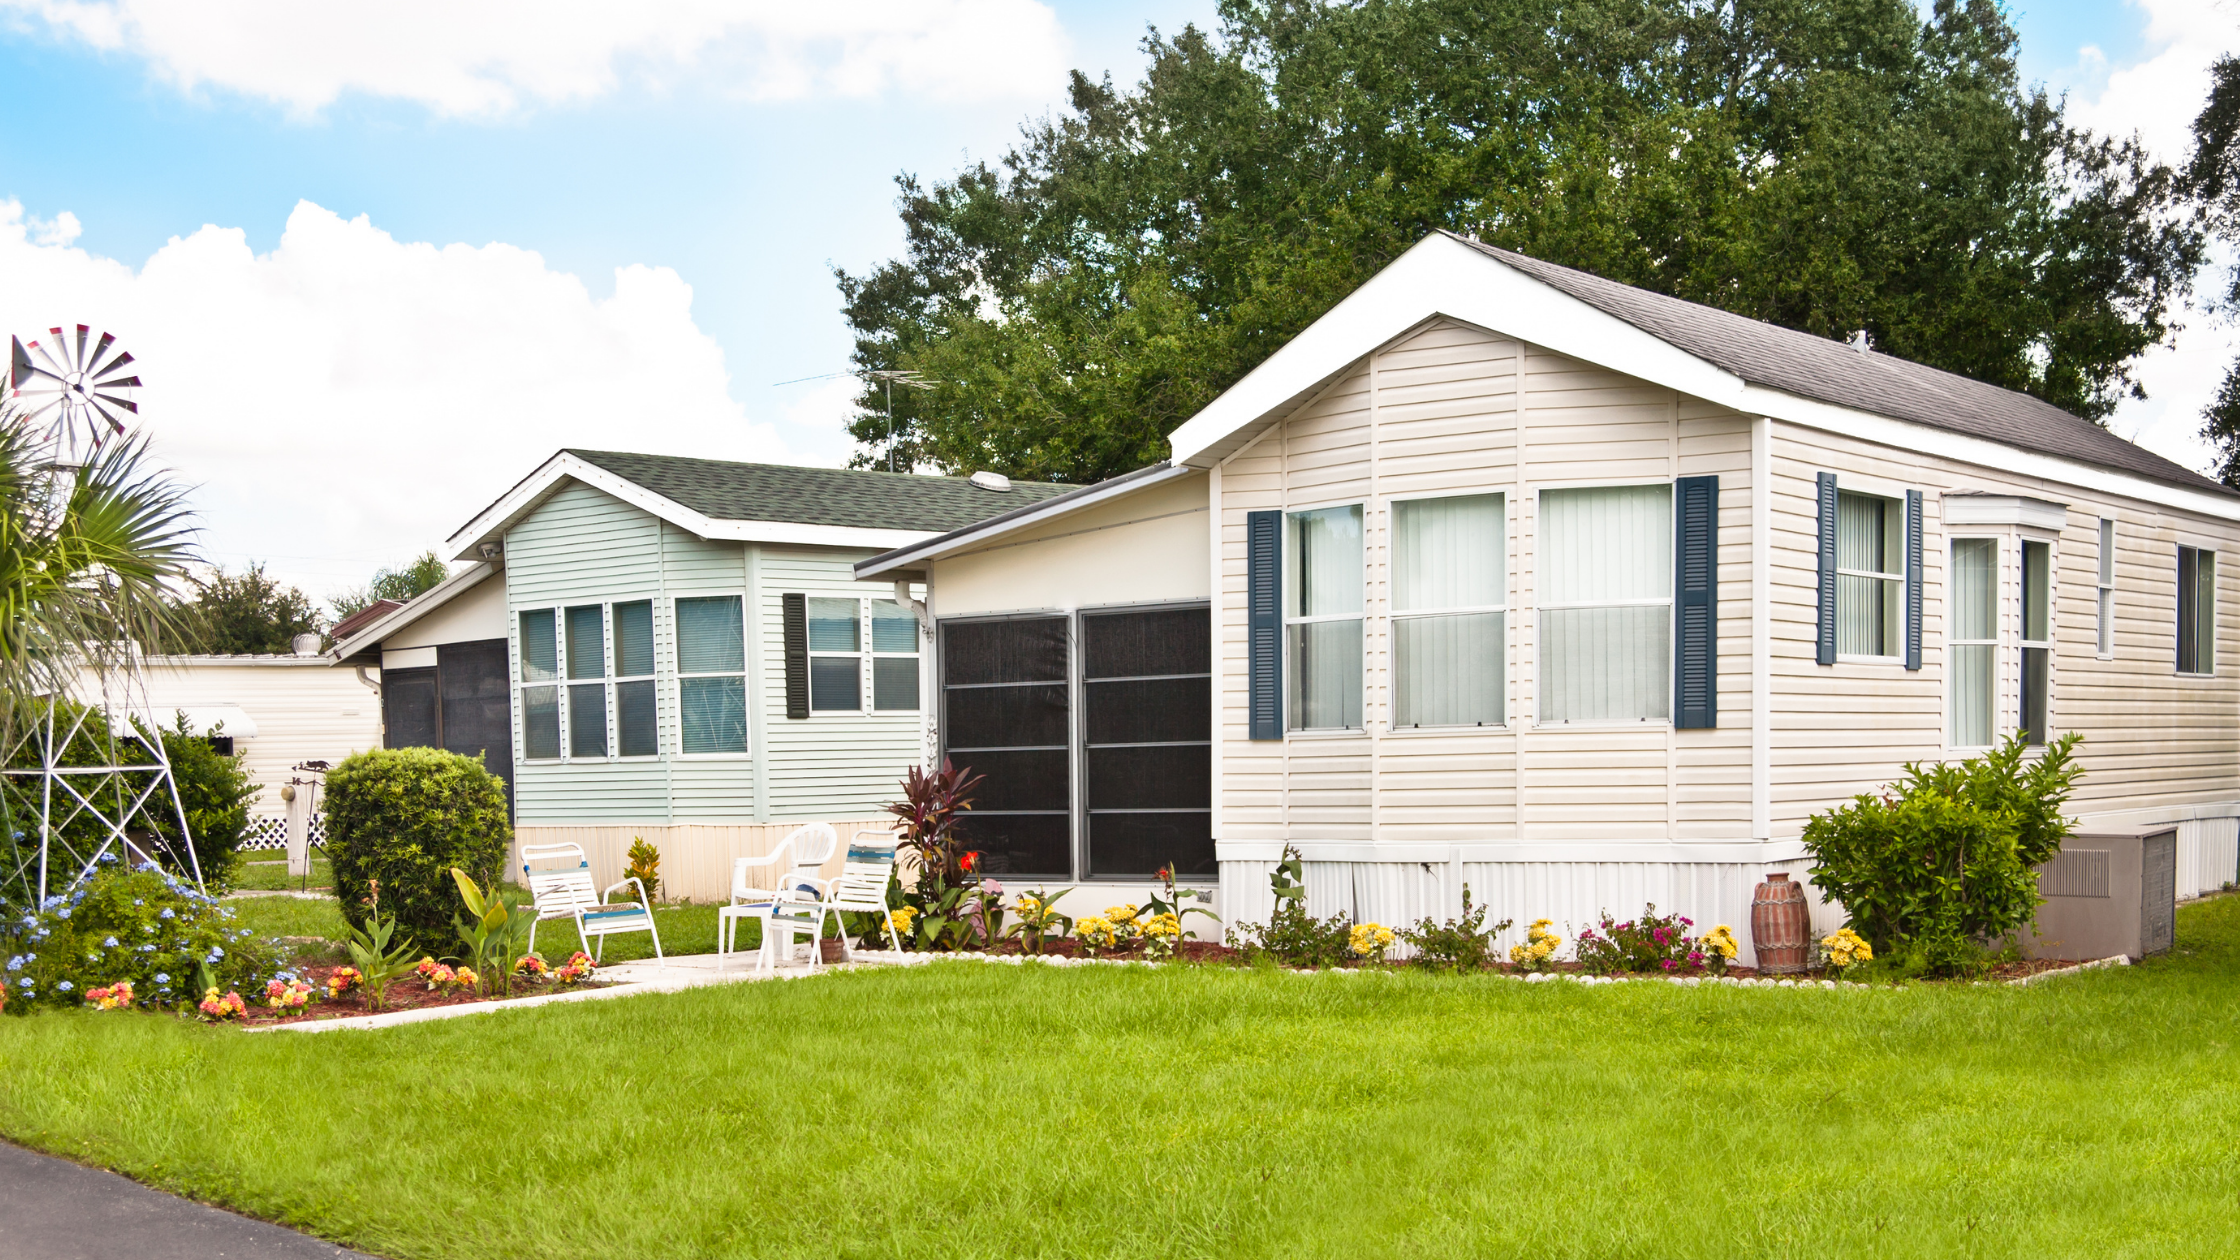 manufactured home communities